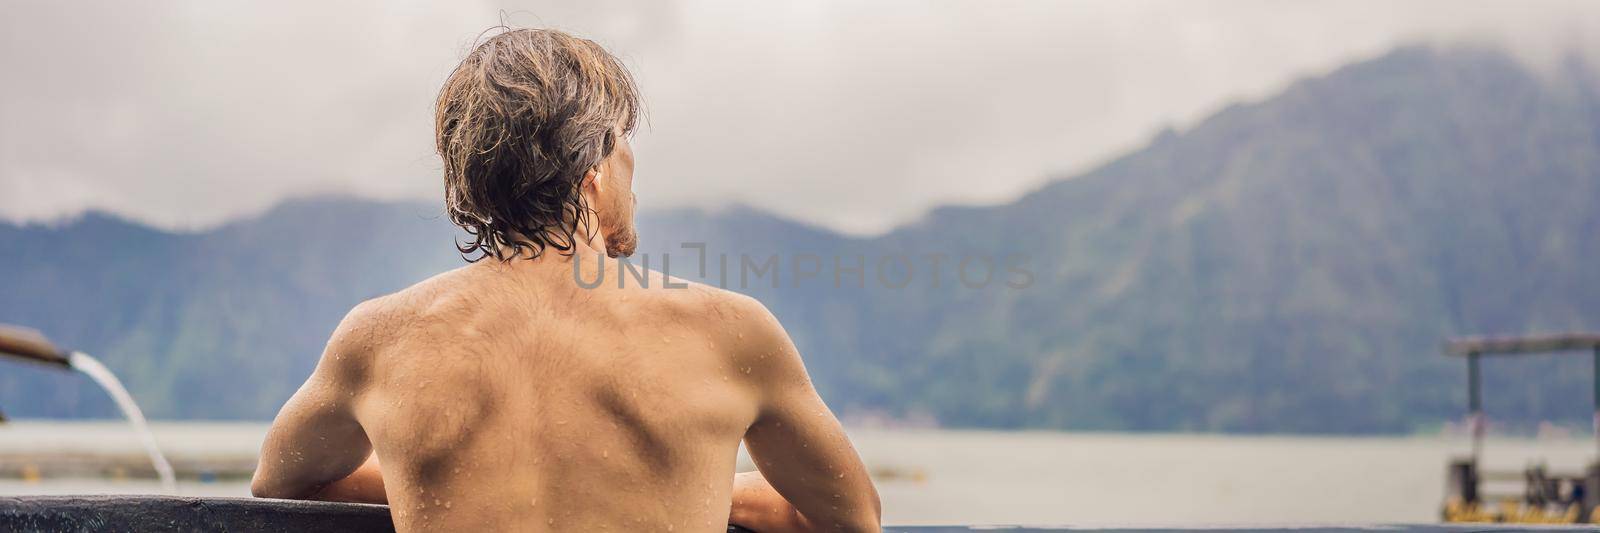 Geothermal spa. Man relaxing in hot spring pool. Young man enjoying bathing relaxed in a blue water lagoon, tourist attraction BANNER, LONG FORMAT by galitskaya